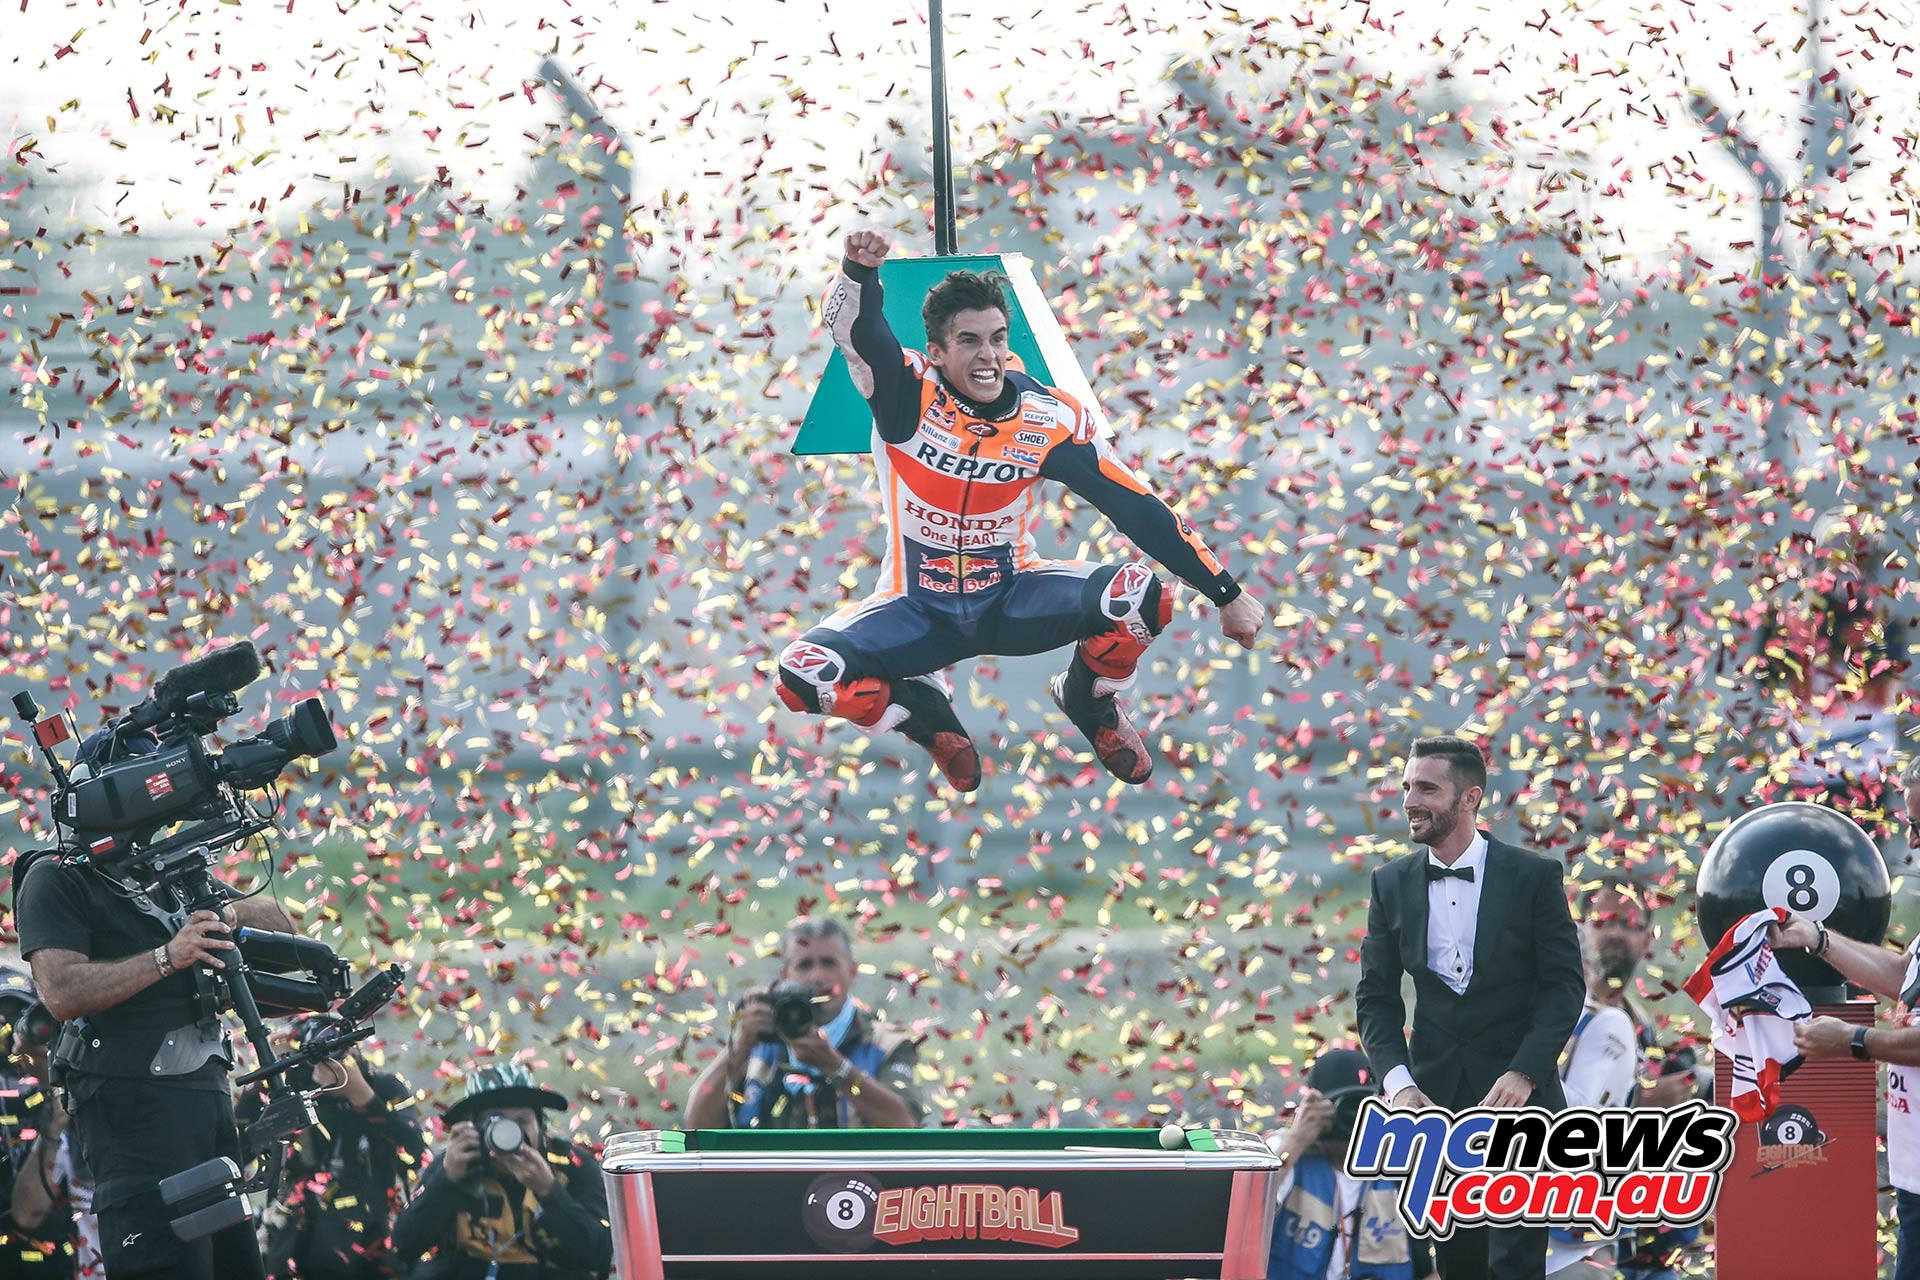 Marc Marquez is the 2018 MotoGP World Champion. #Level7 completed